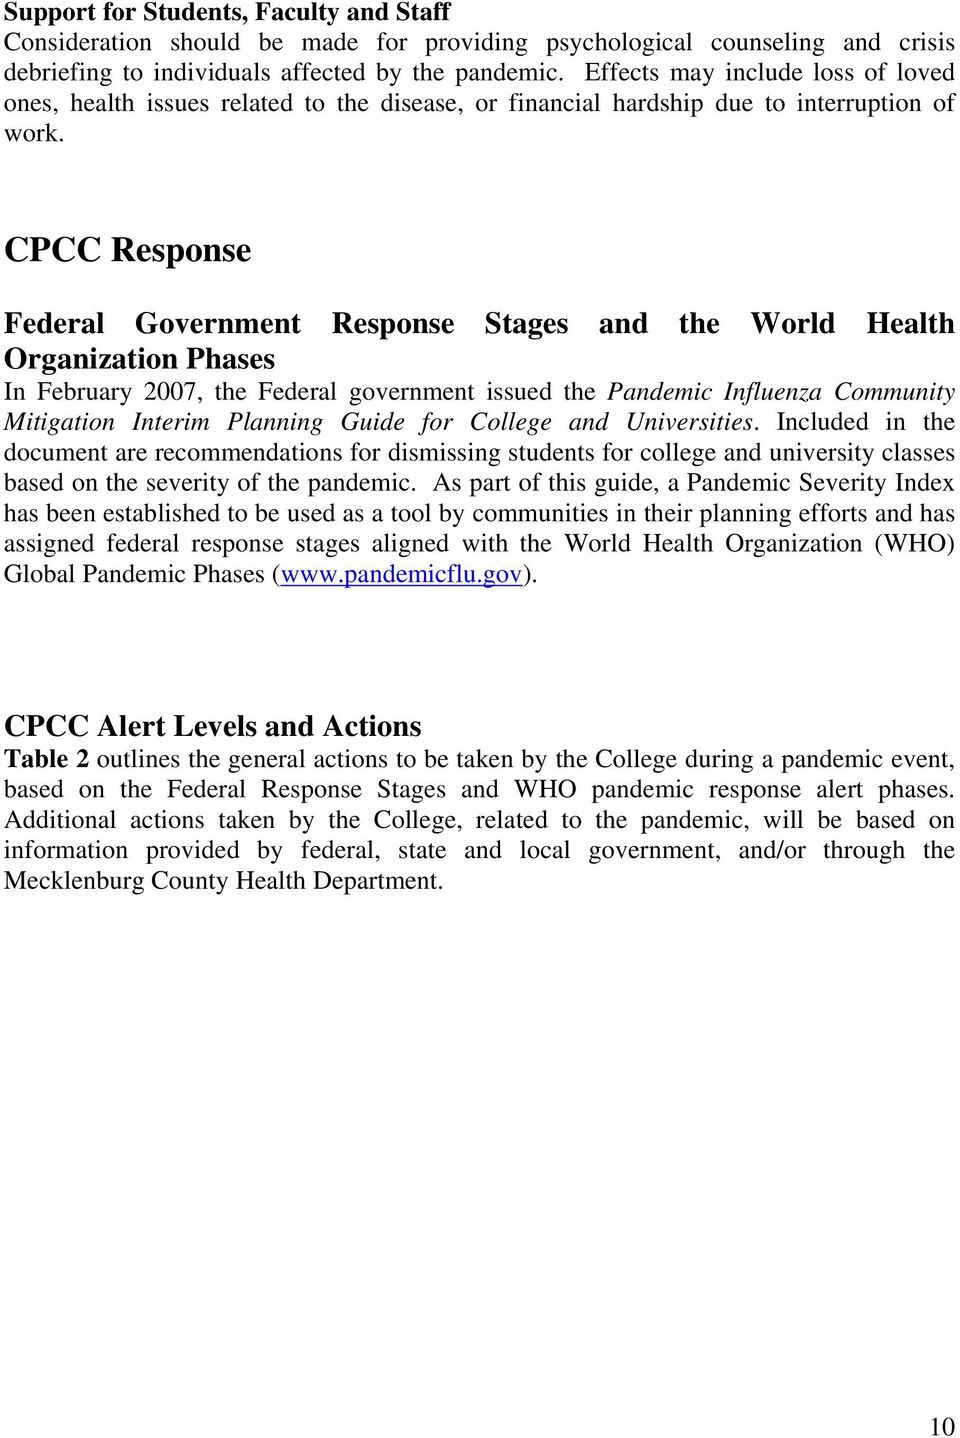 CPCC Response Federal Government Response Stages and the World Health Organization Phases In February 2007, the Federal government issued the Pandemic Influenza Community Mitigation Interim Planning